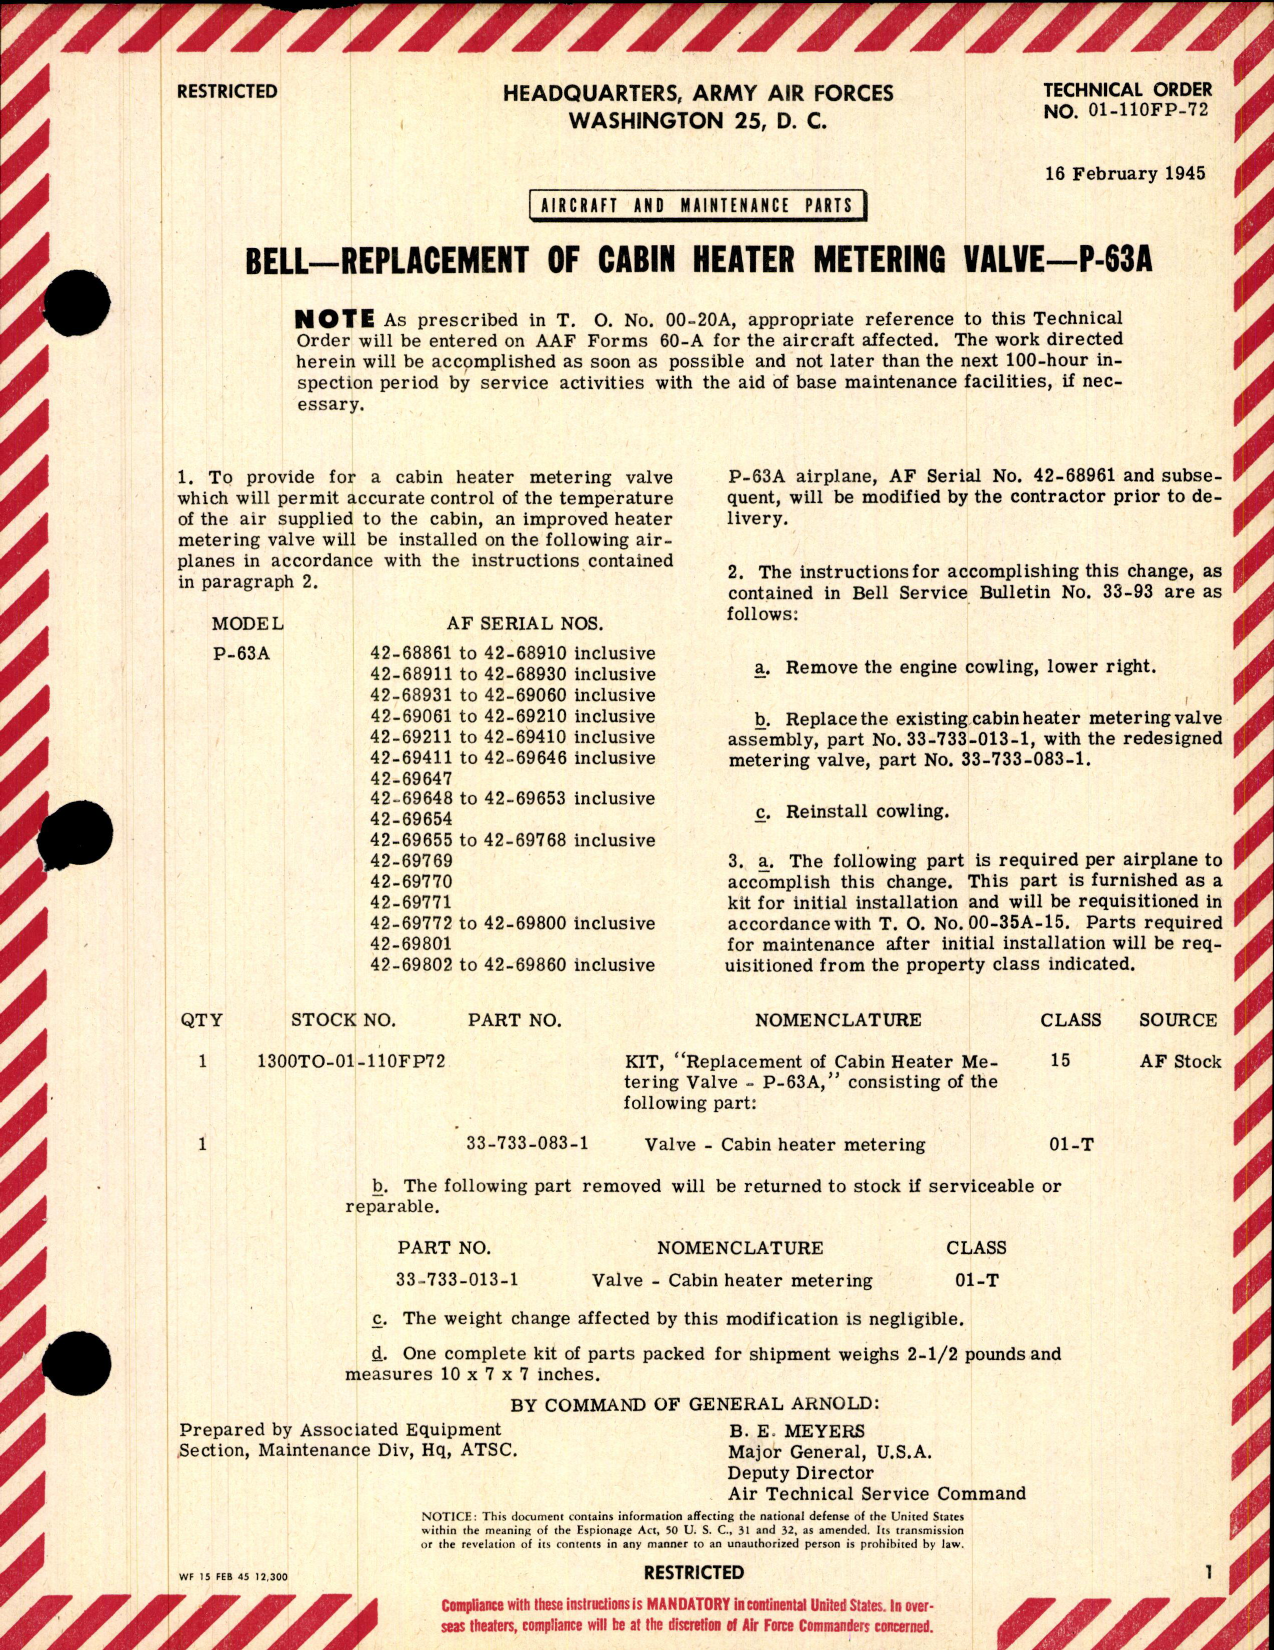 Sample page 1 from AirCorps Library document: Replacement of Cabin Heater Metering Valve